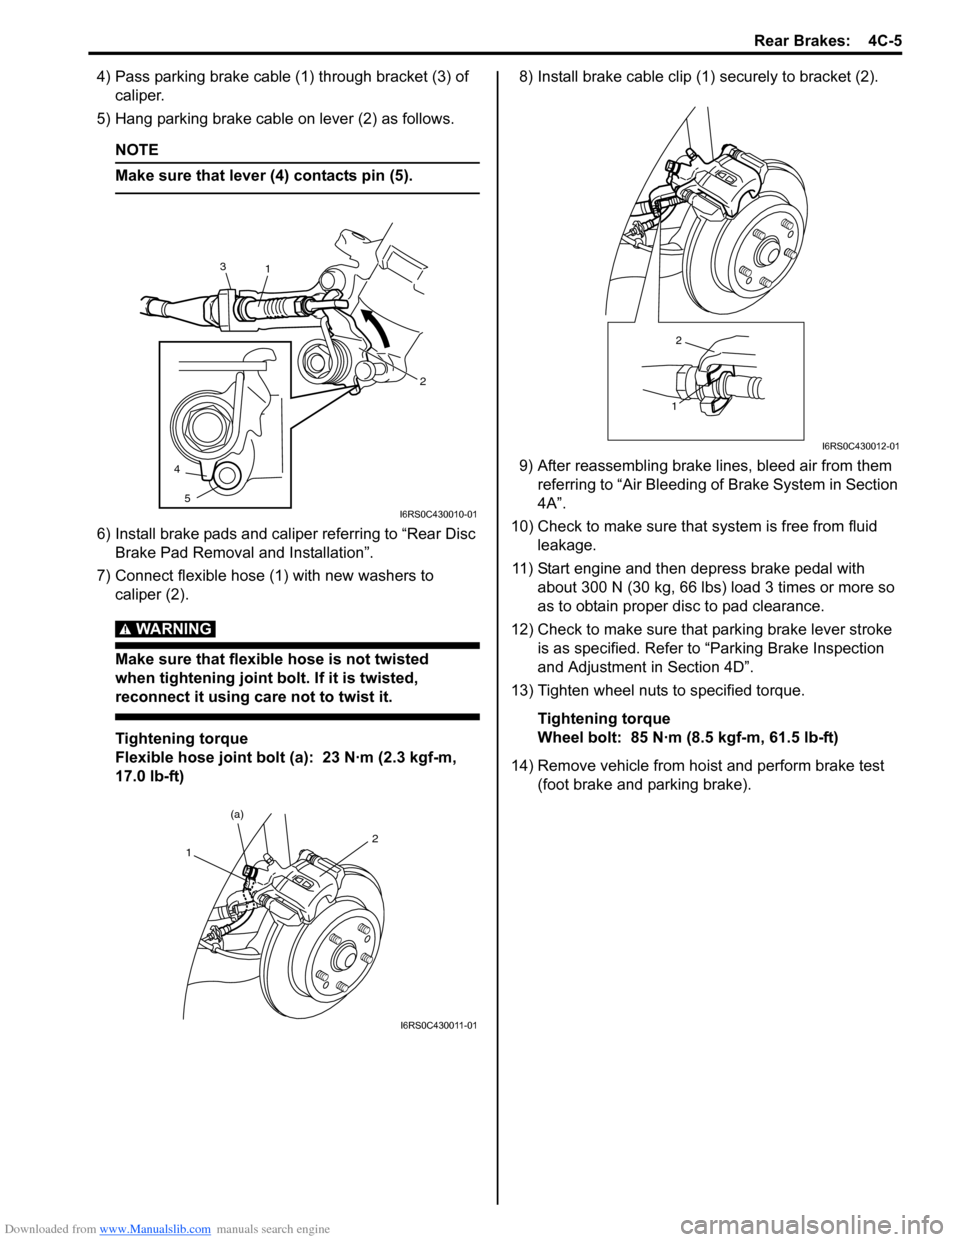 SUZUKI SWIFT 2005 2.G Service Owners Manual Downloaded from www.Manualslib.com manuals search engine Rear Brakes:  4C-5
4) Pass parking brake cable (1) through bracket (3) of caliper.
5) Hang parking brake cable on lever (2) as follows.
NOTE
Ma